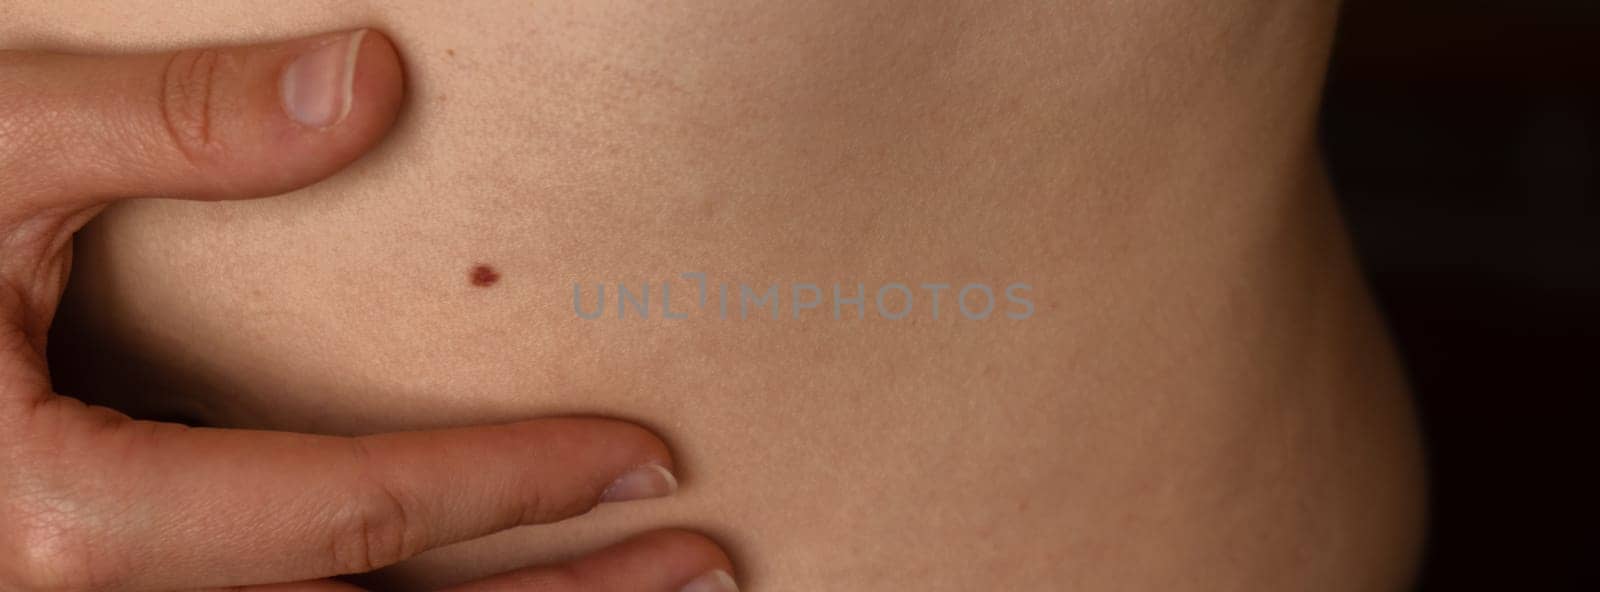 Unrecognizable woman showing her Birthmarks on skin Close up detail of the bare skin Sun Exposure effect on skin, Banner Health Effects of UV Radiation Woman with birthmarks Pigmentation and lot of birthmarks